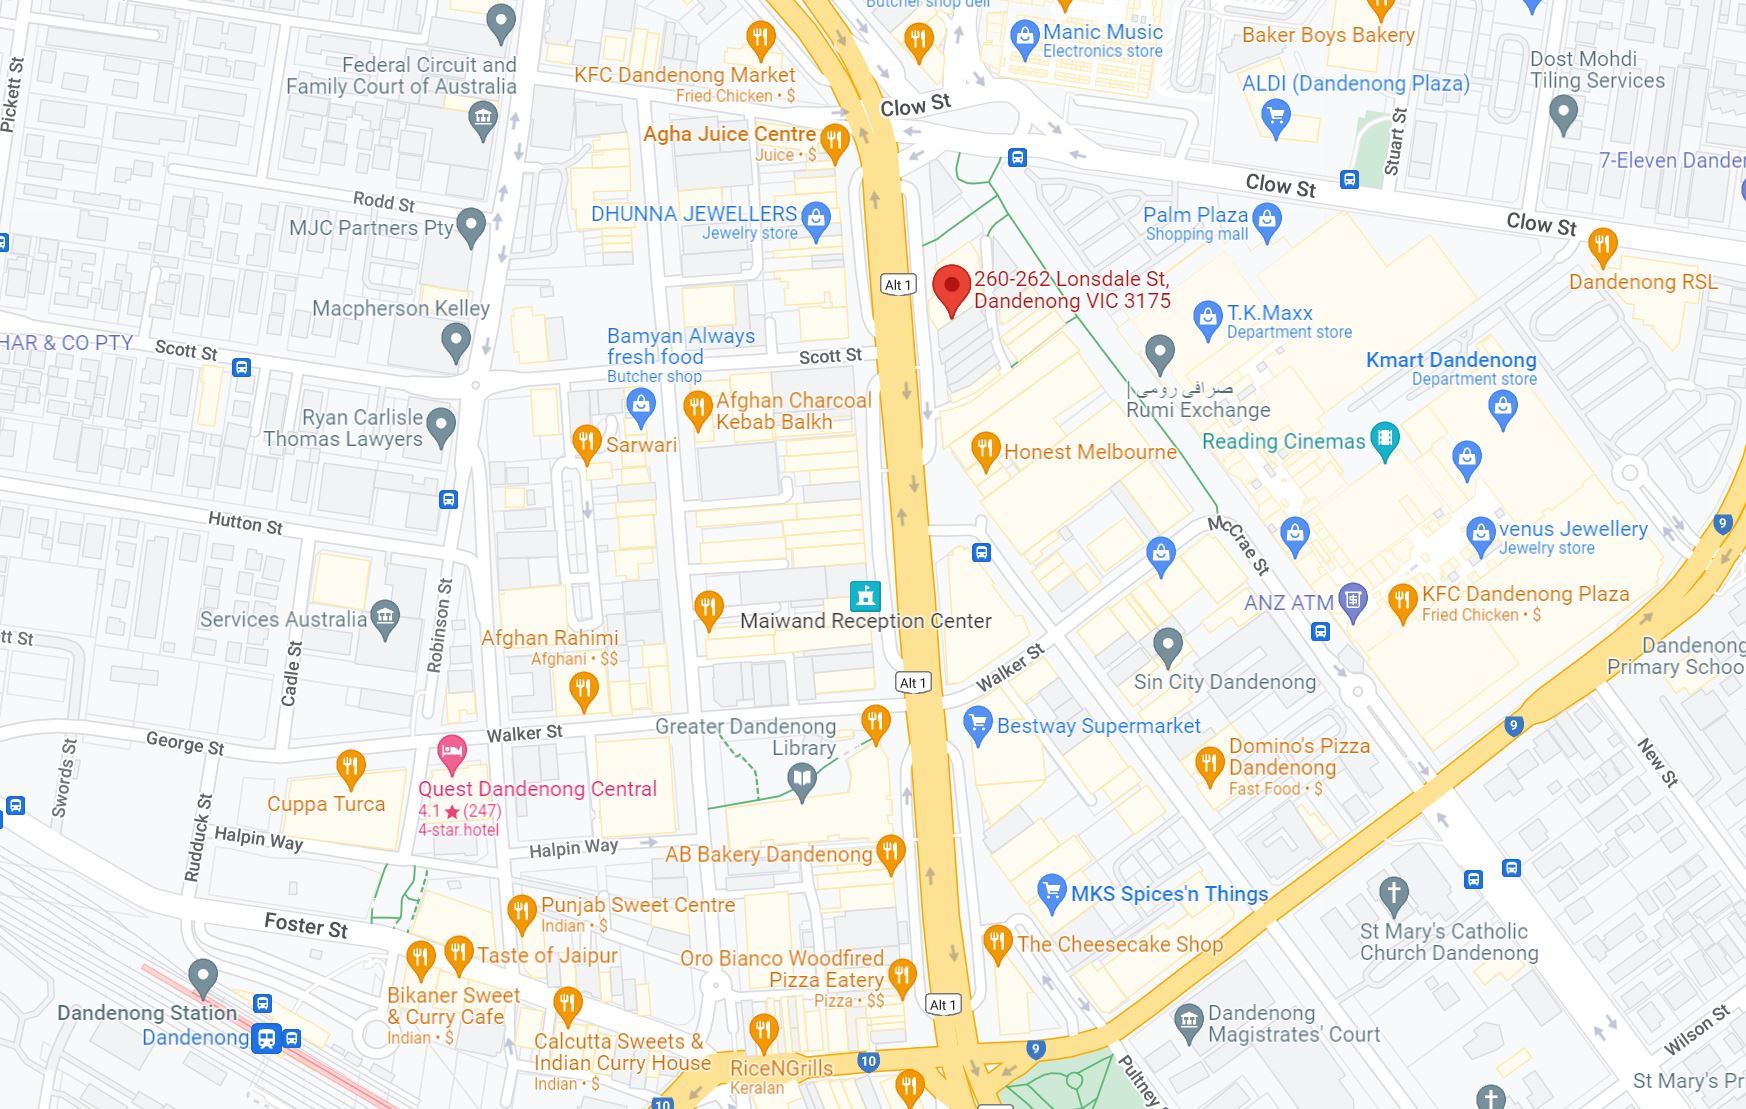 Map of area aroind Lonsdale Street, Dandenonng